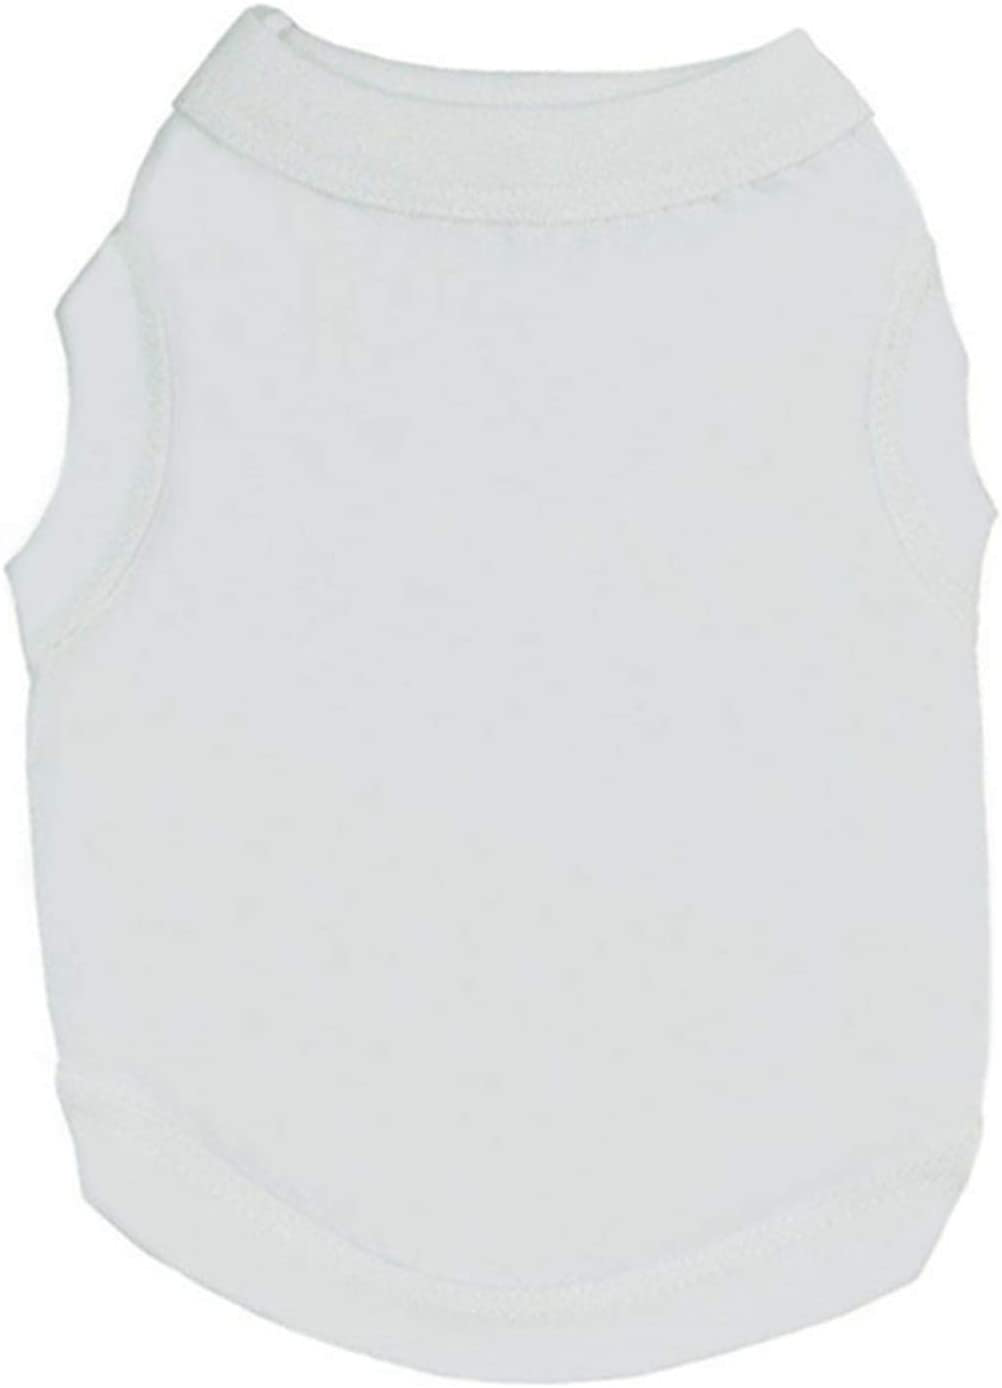 Alroman Dogs Shirts White Vest Clothing for Dogs Cats Dog Vacation Shirt Male Female Dog Clothing Puppy Summer Clothes Girls Boys Dog Cat Cotton Summer Shirt Small Pet Clothes Vest T-Shirt Apparel Animals & Pet Supplies > Pet Supplies > Cat Supplies > Cat Apparel Alroman White S (4.4~6.6lbs) 